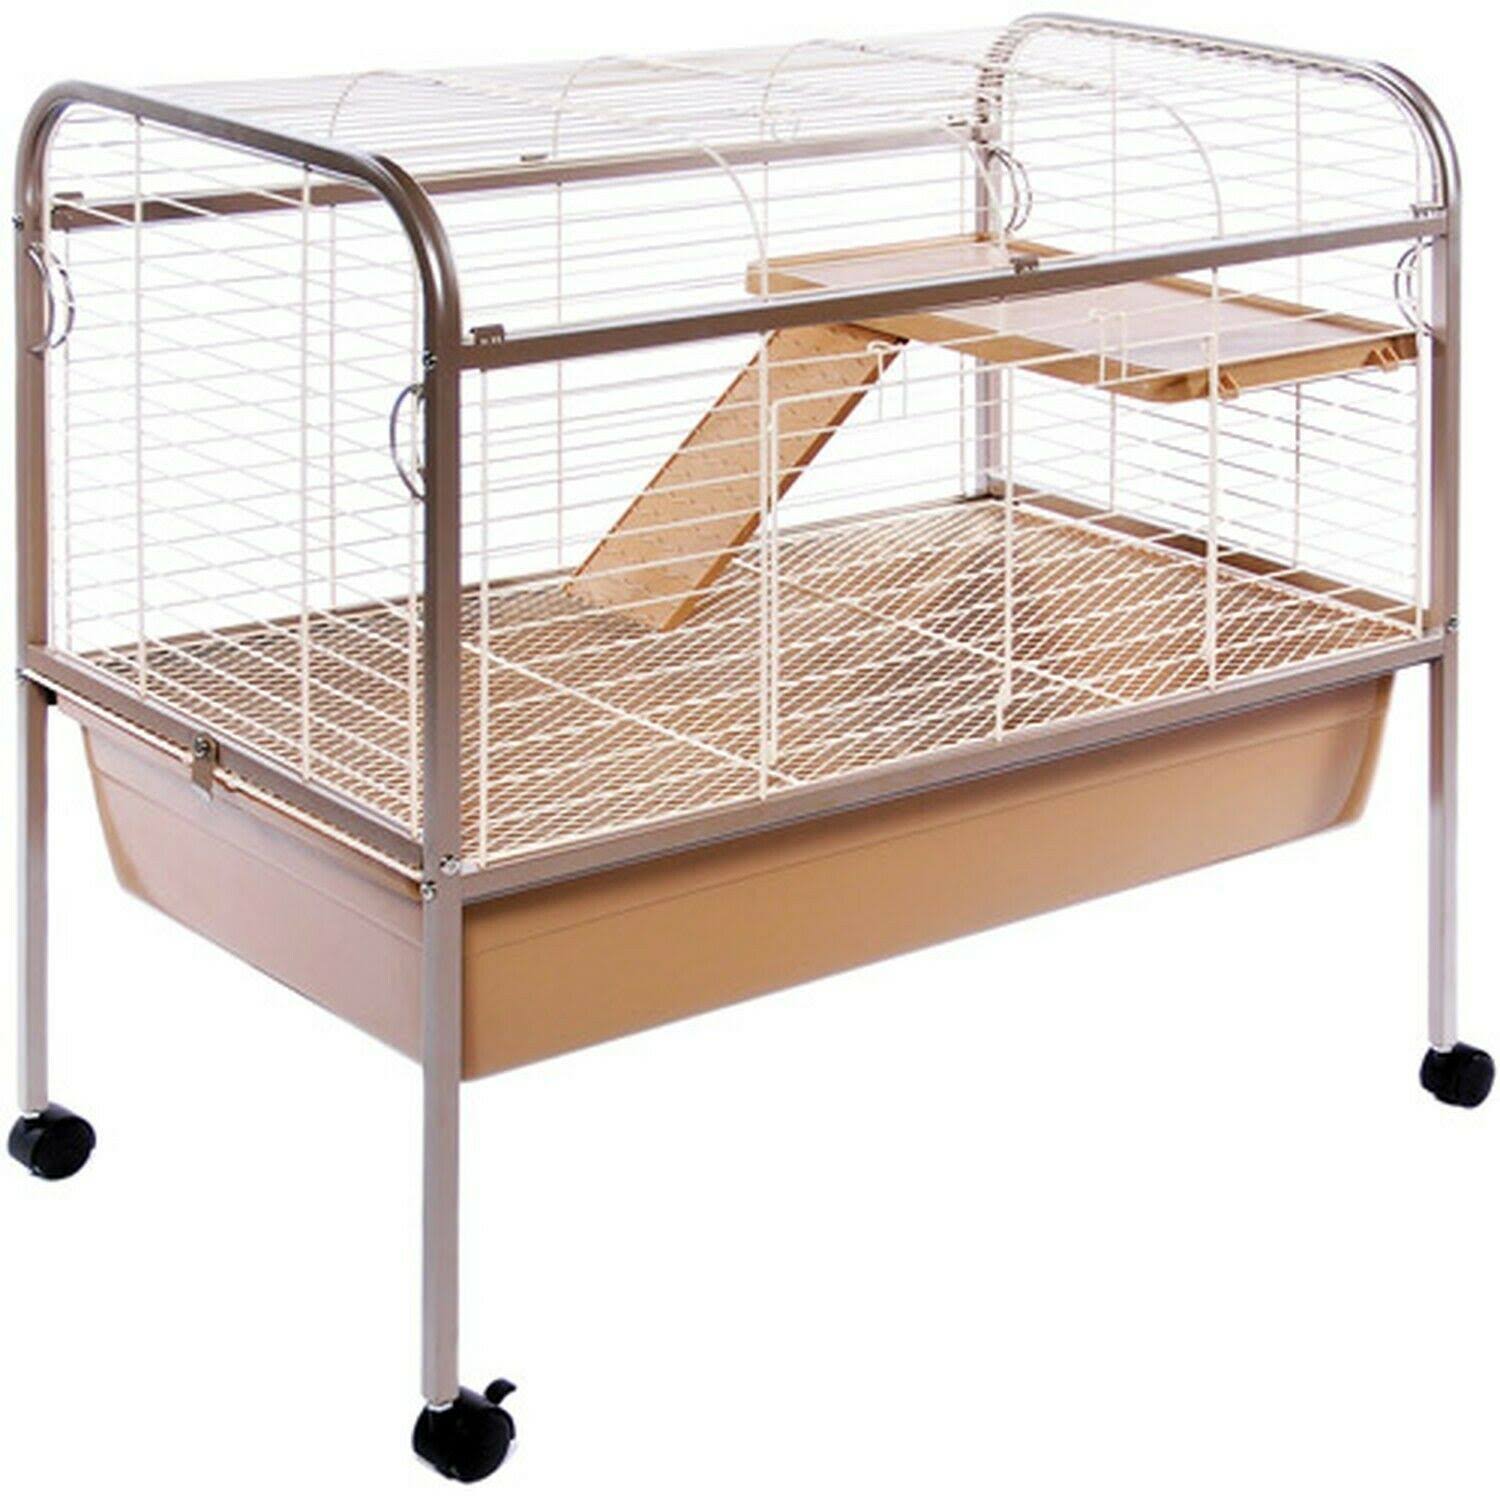 Prevue Pet Products Spv425 Animal Cage - Small